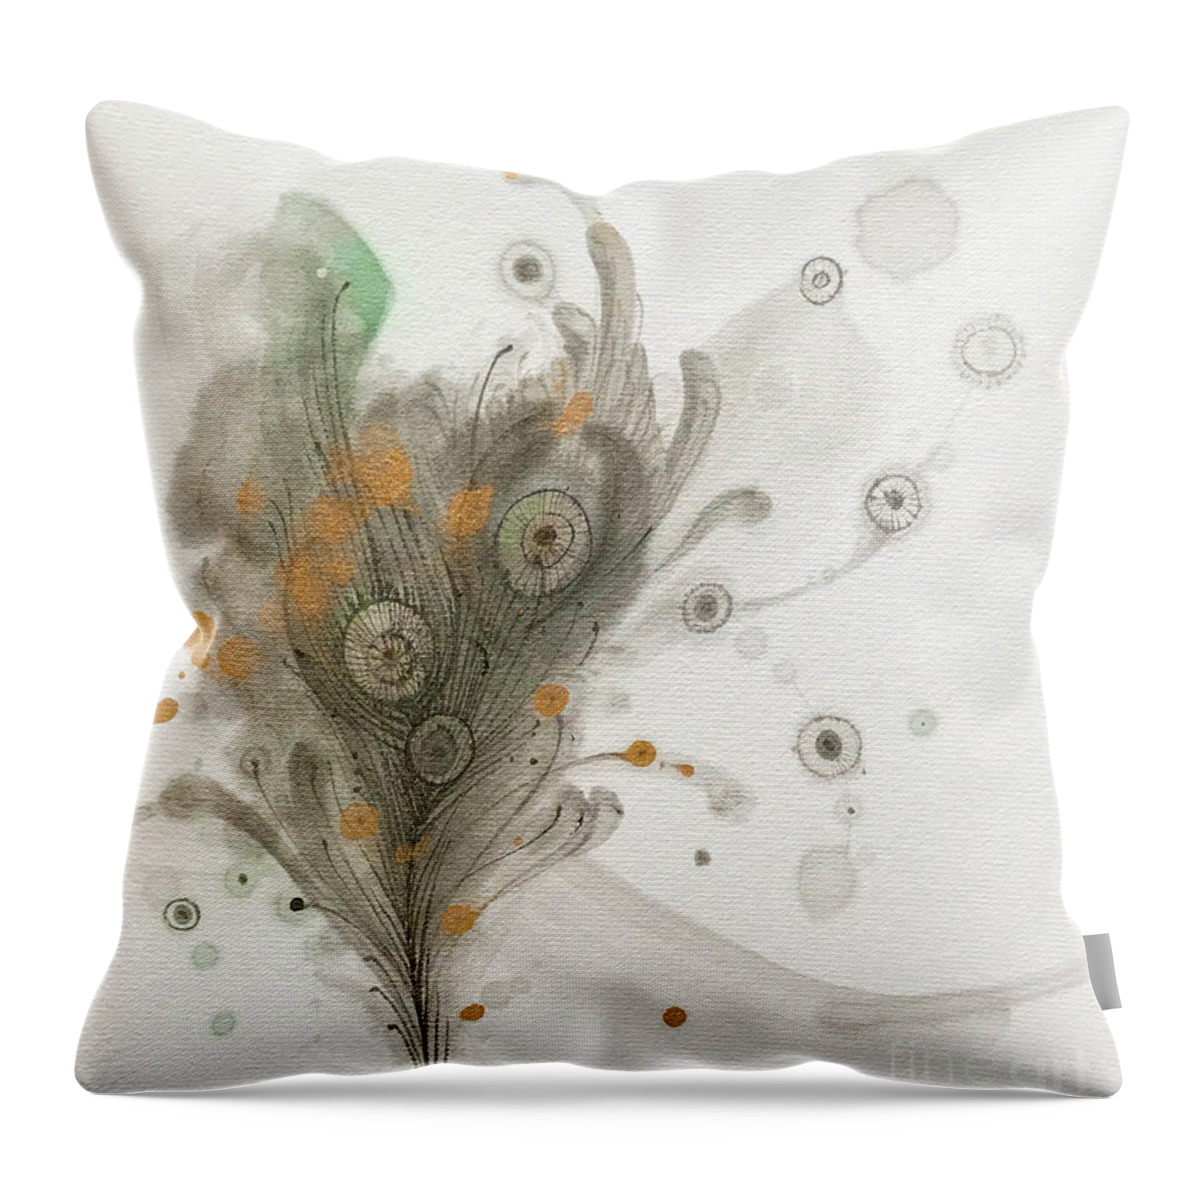 Japanese Throw Pillow featuring the painting Cure 3 by Fumiyo Yoshikawa